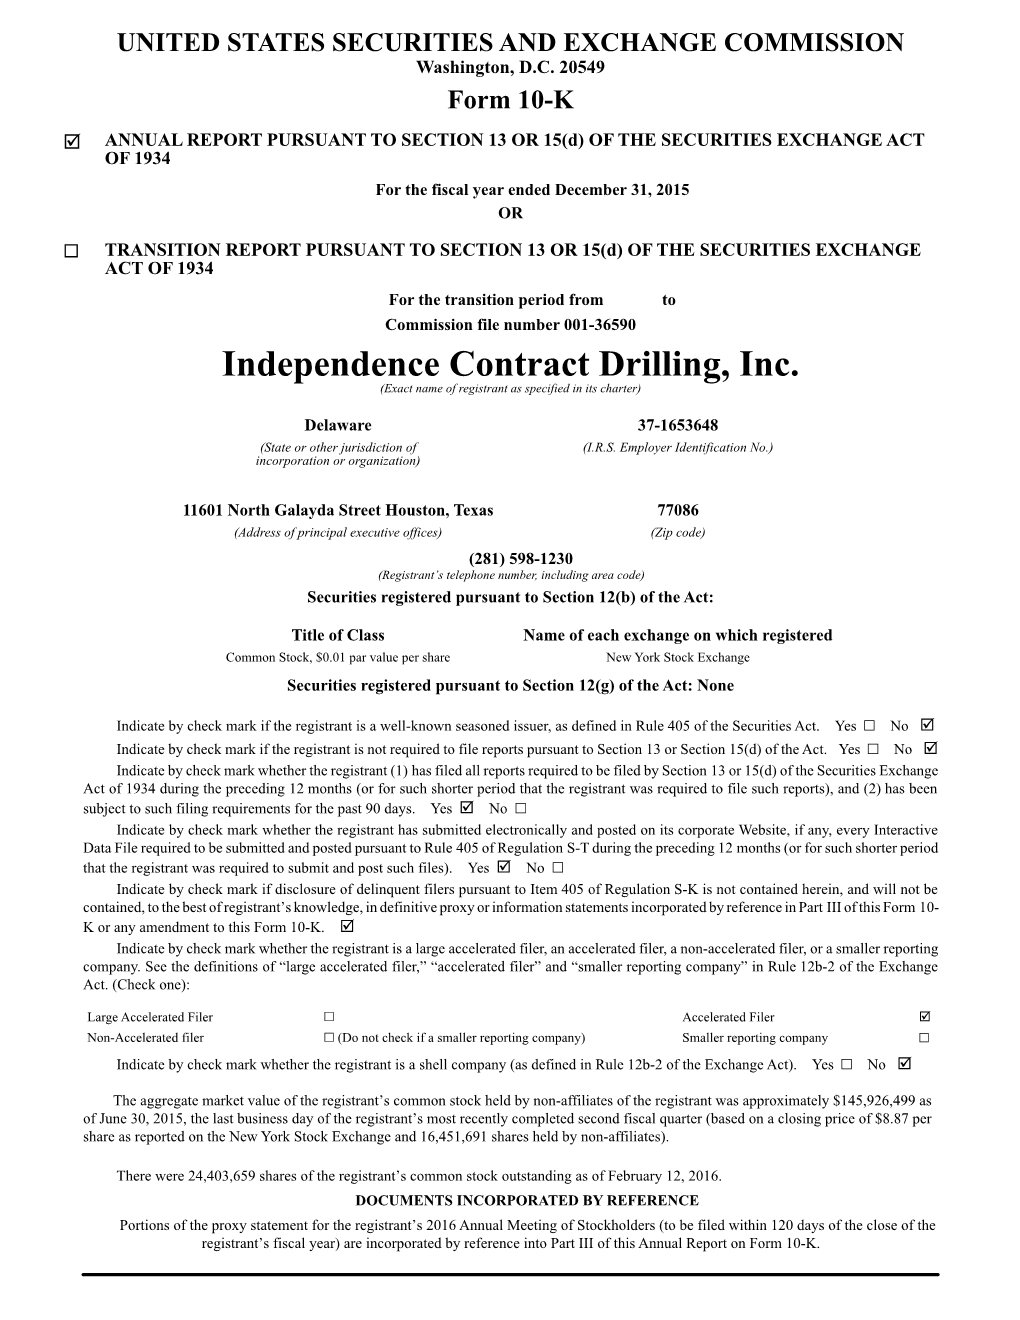 Independence Contract Drilling, Inc. (Exact Name of Registrant As Specified in Its Charter)